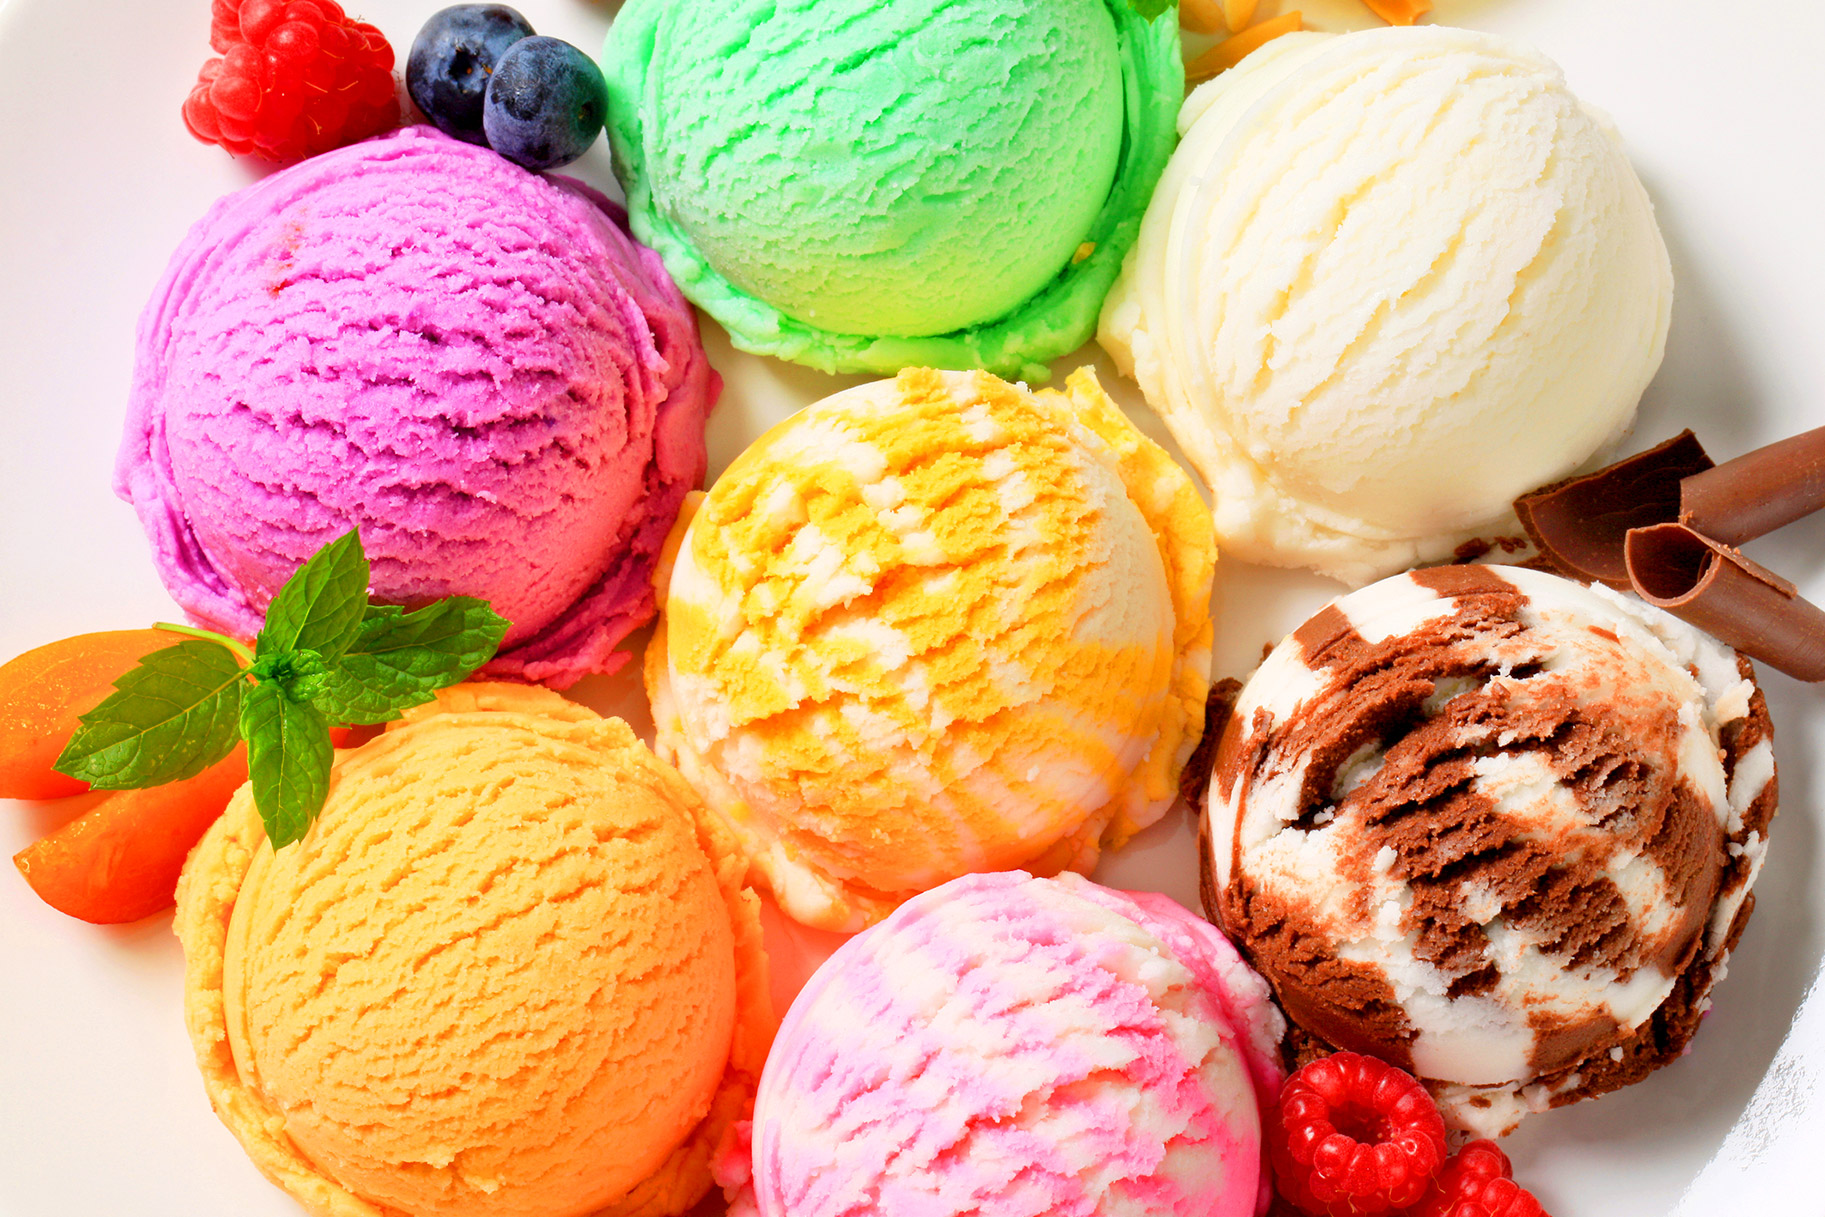 Ice Cream Market 2019 Global Industry Size, Share, Revenue, Business Growth, Demand and Applications Market Research Report to 2027